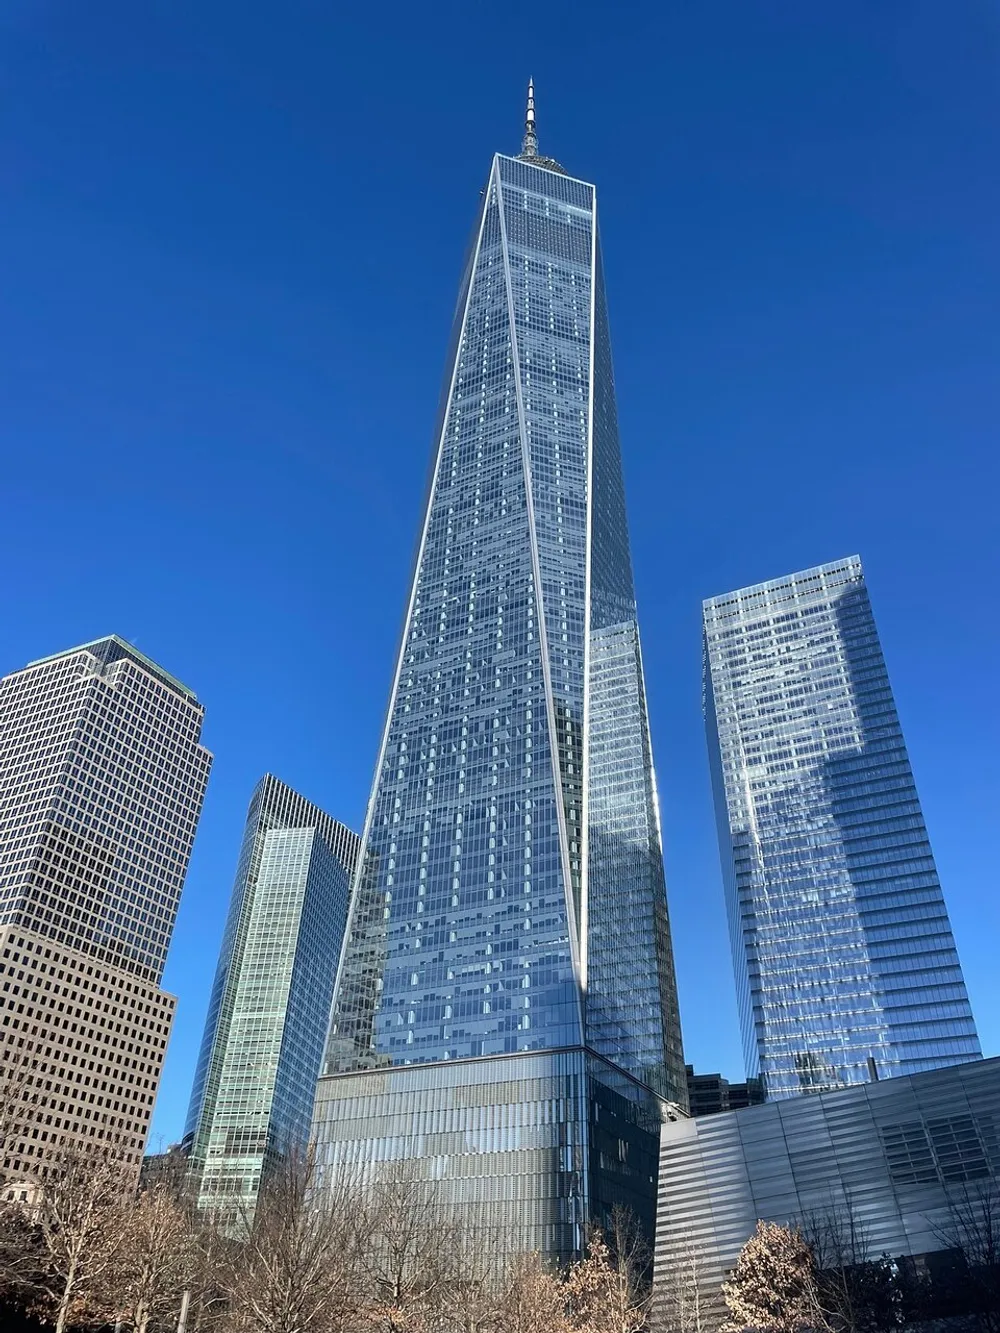 This image shows a tall striking skyscraper dominating the skyline against a clear blue sky surrounded by several other high-rise buildings